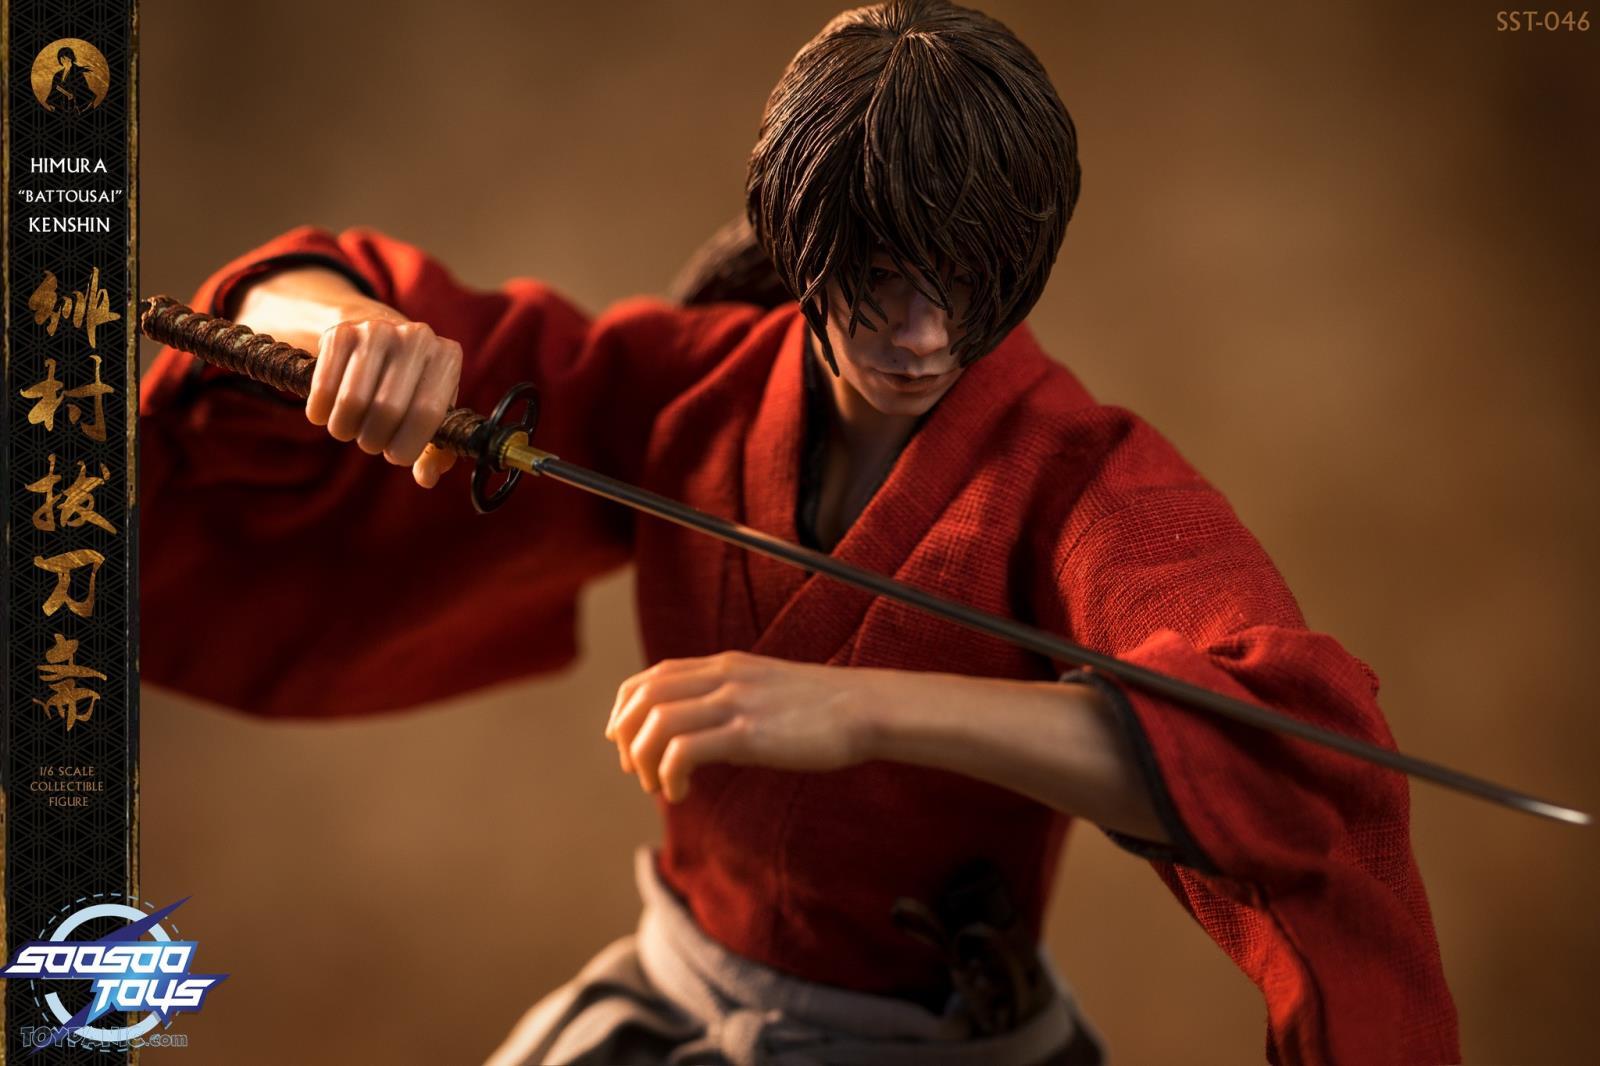 NEW PRODUCT: 1/6 scale Rurouni Kenshin Collectible Figure from SooSooToys 712202251230PM_8303448